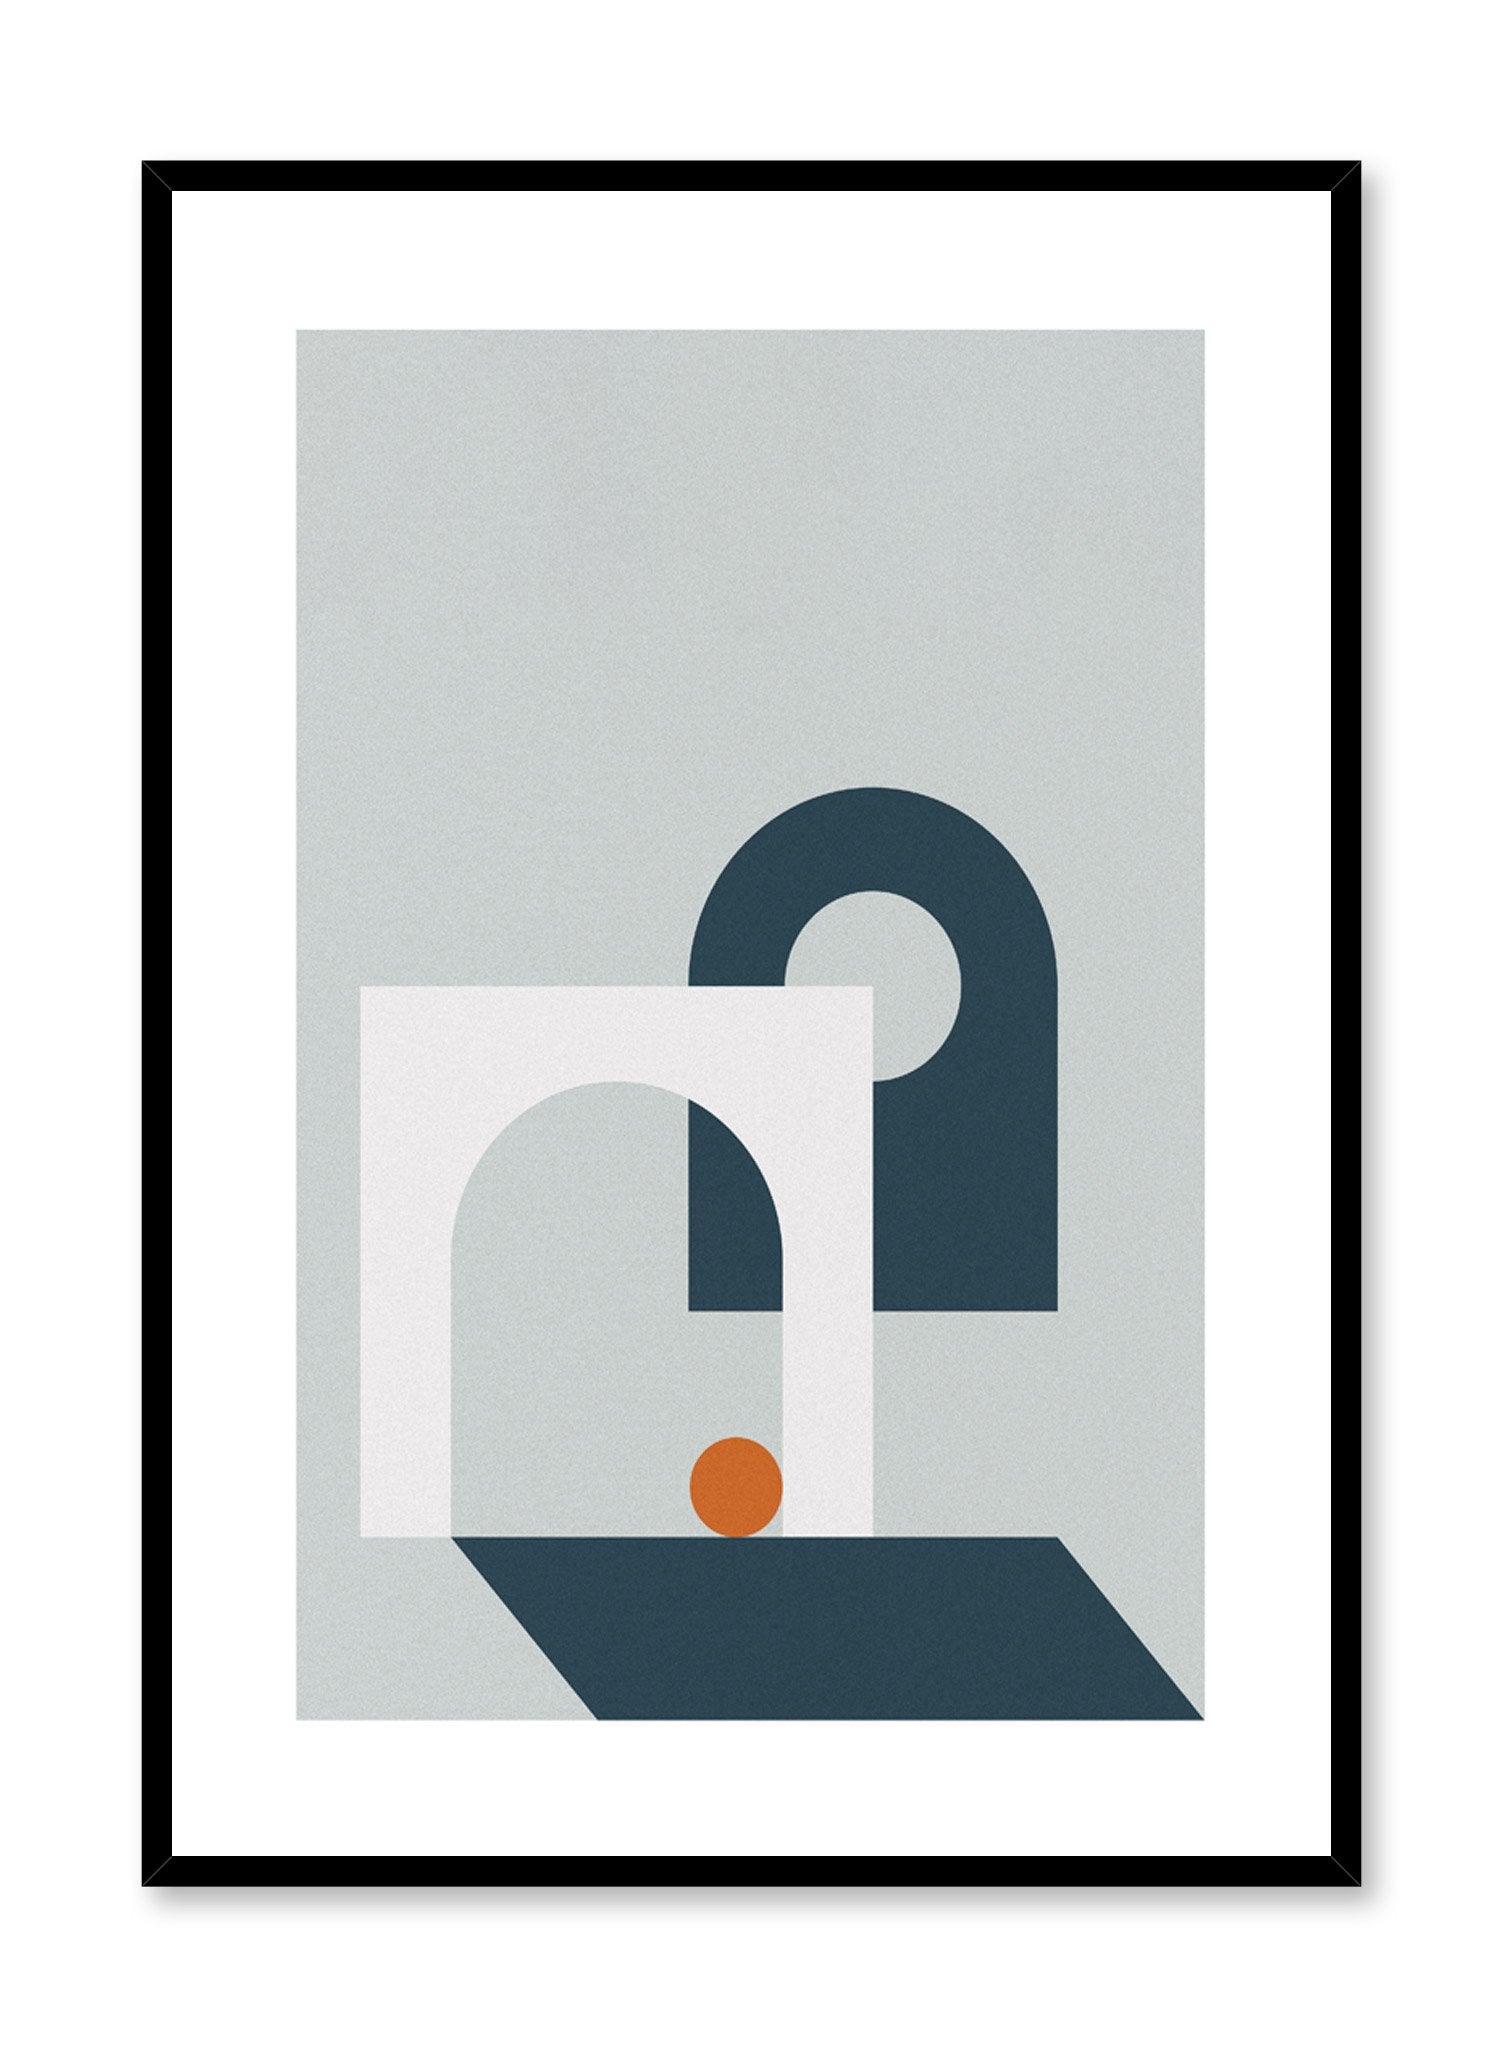 Minimalist design poster by Opposite Wall with Hole in One abstract graphic design